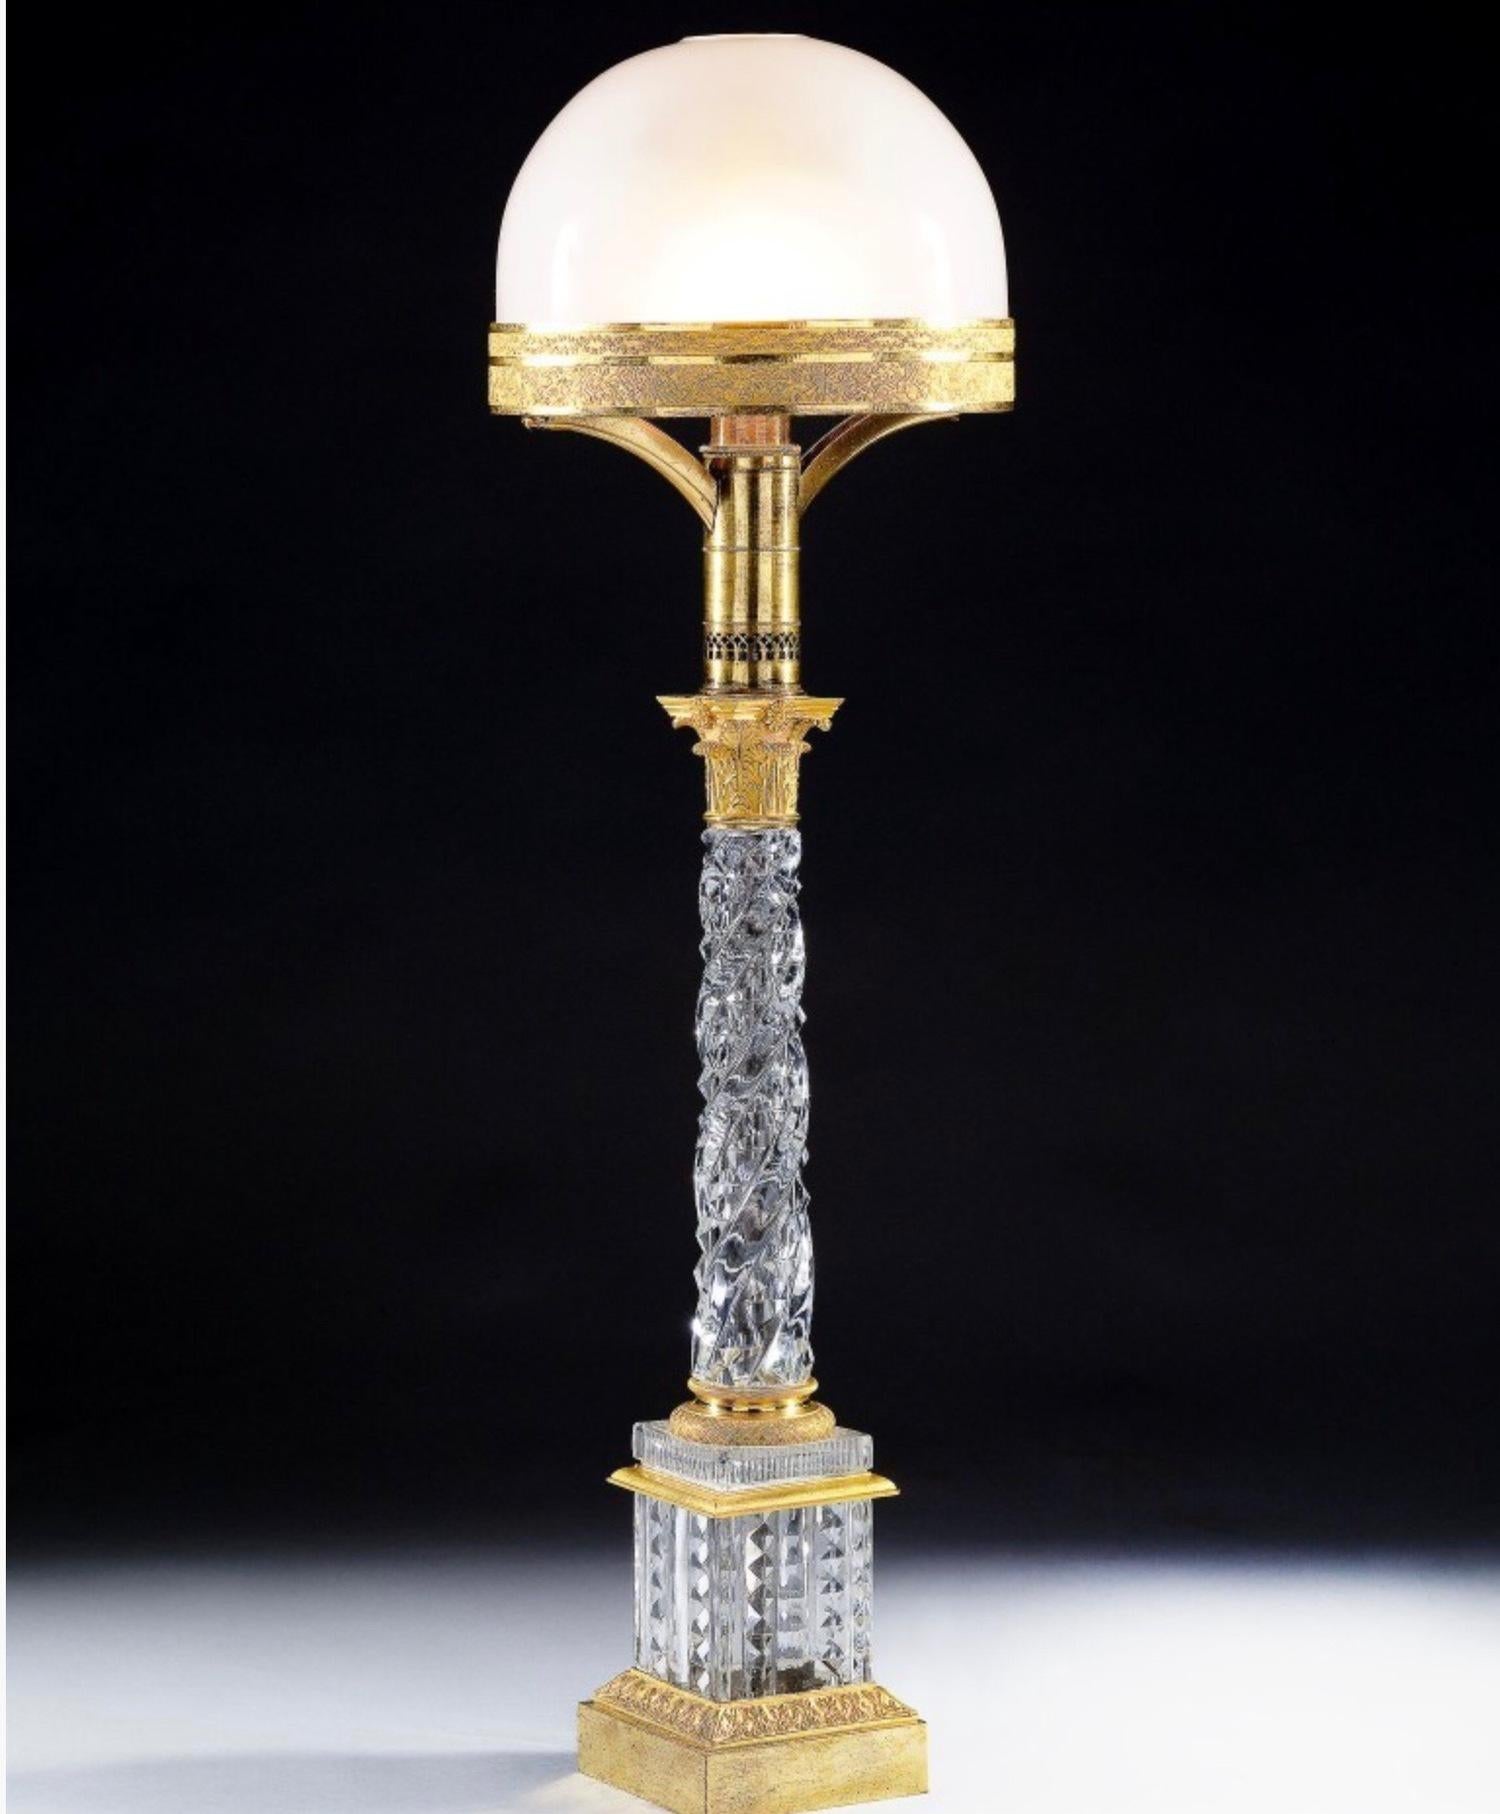 Baccarat Cut Glass and Ormolu Table Lamp

A Charles X Baccarat glass and gilt bronze table lamp. The glass is of the finest quality as is the gilt bronze. ( the glass shade is a modern replacement ) France circa 1820

Additional